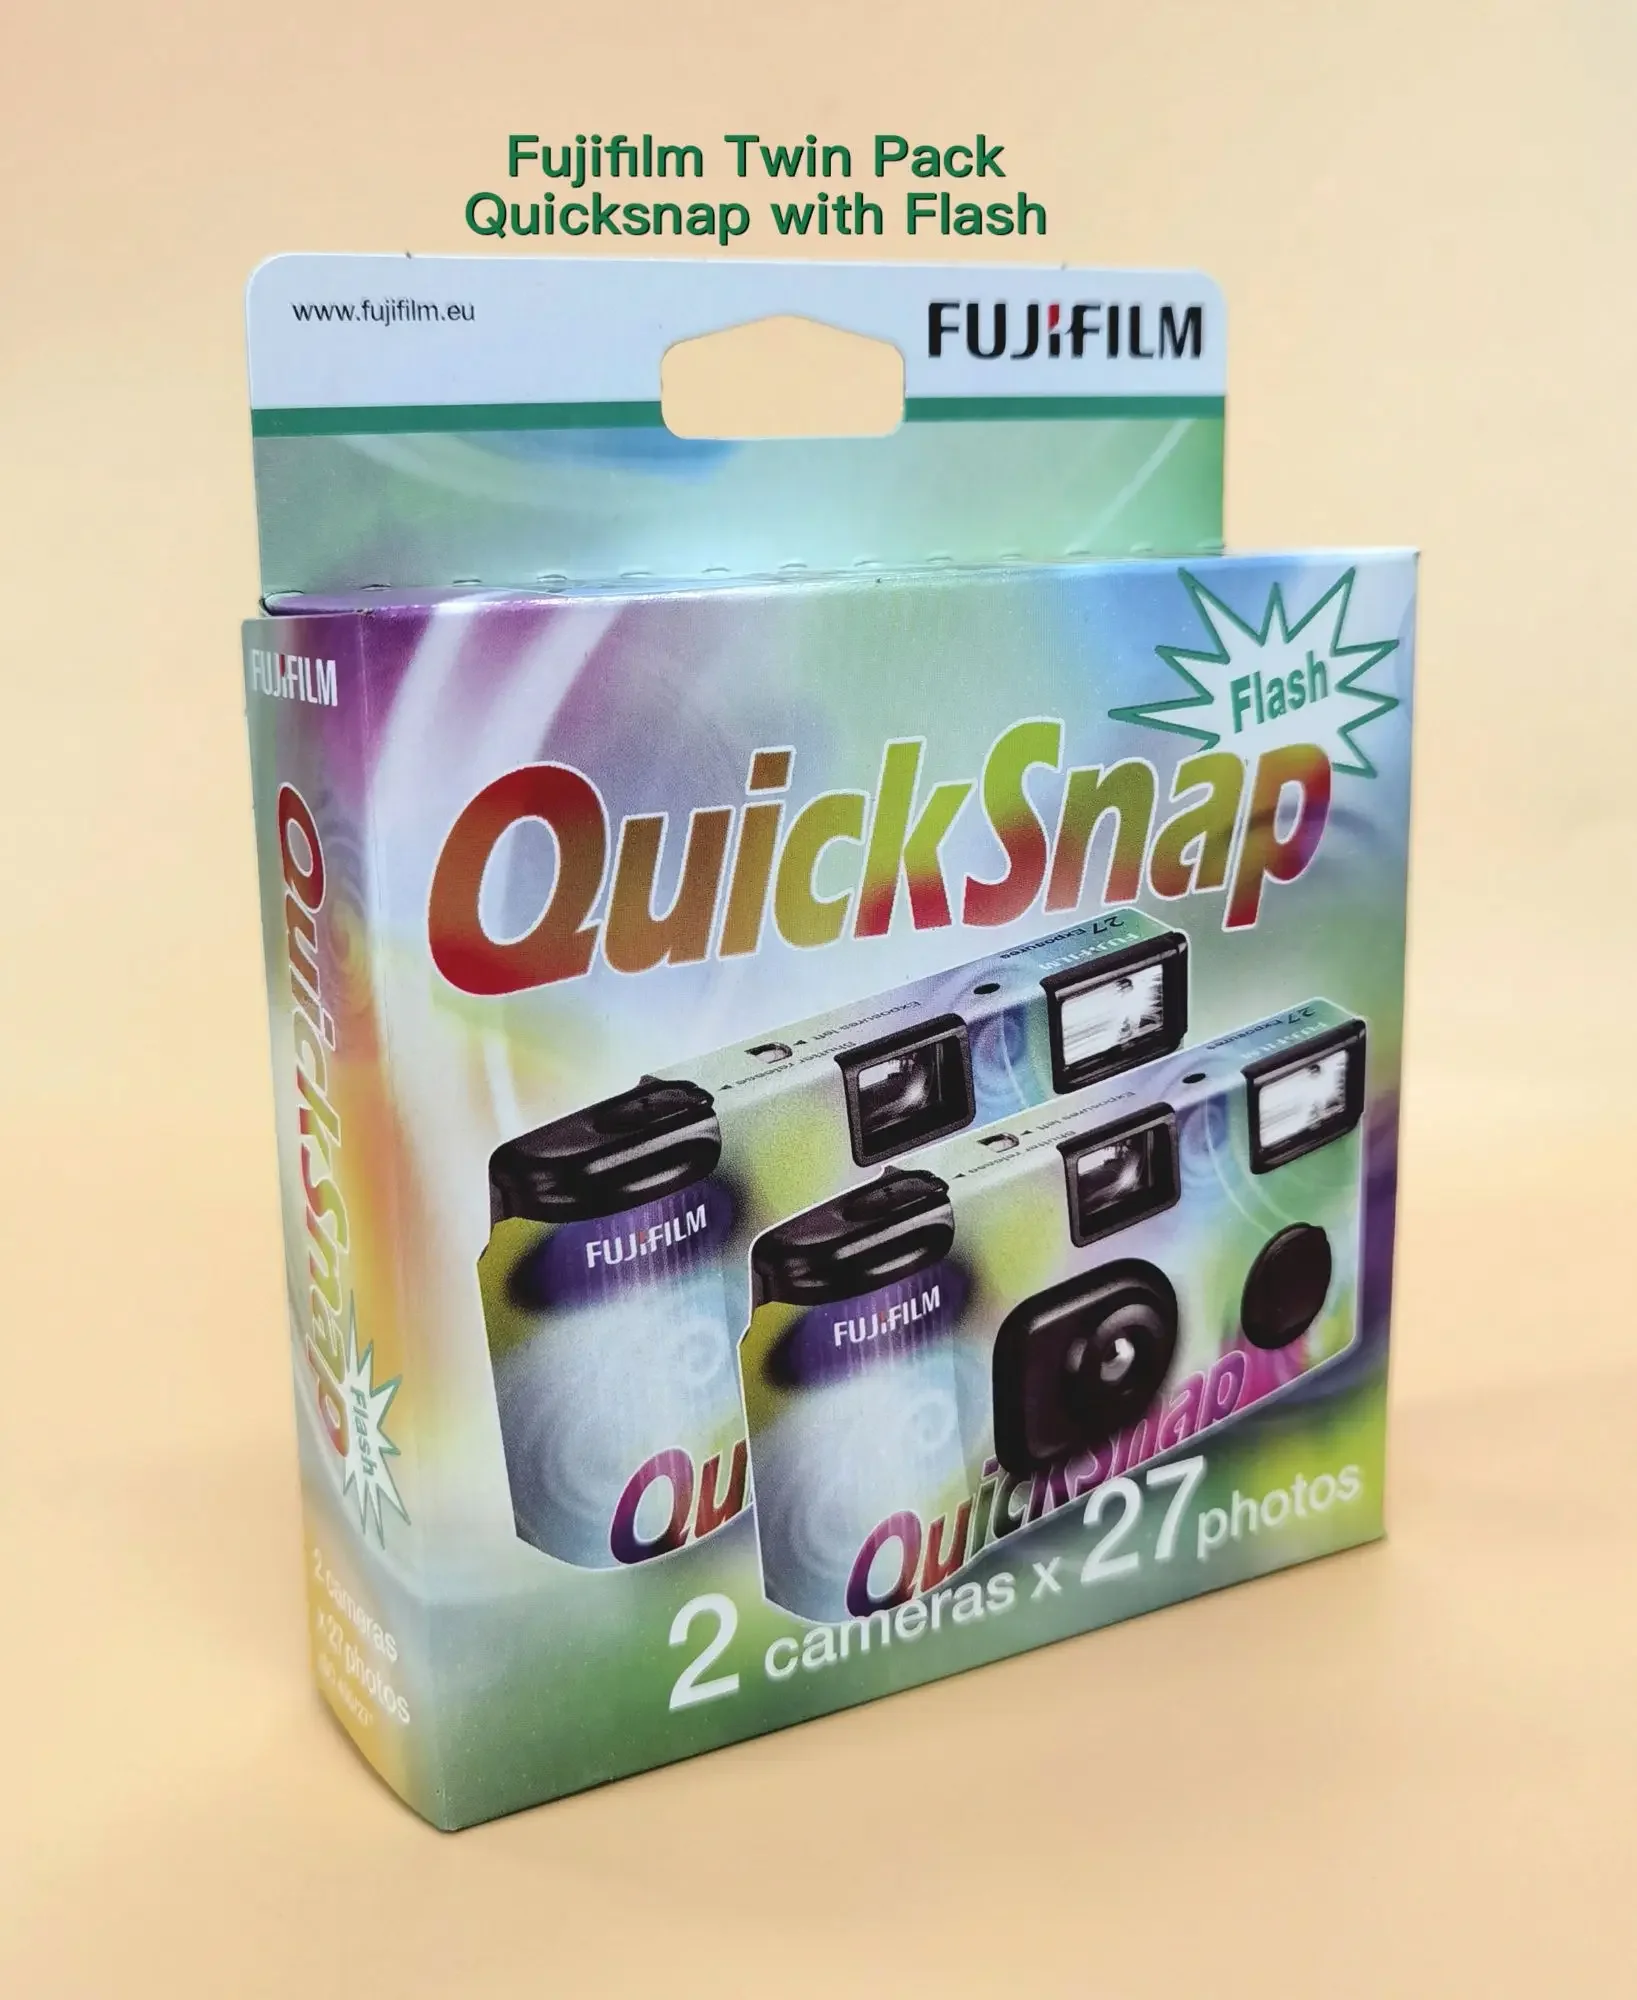 1box(2pcs) Fujifilm 35mm Disposable Single use Film Camera Twin Pack Quicksnap with Flash - 27 Exposures